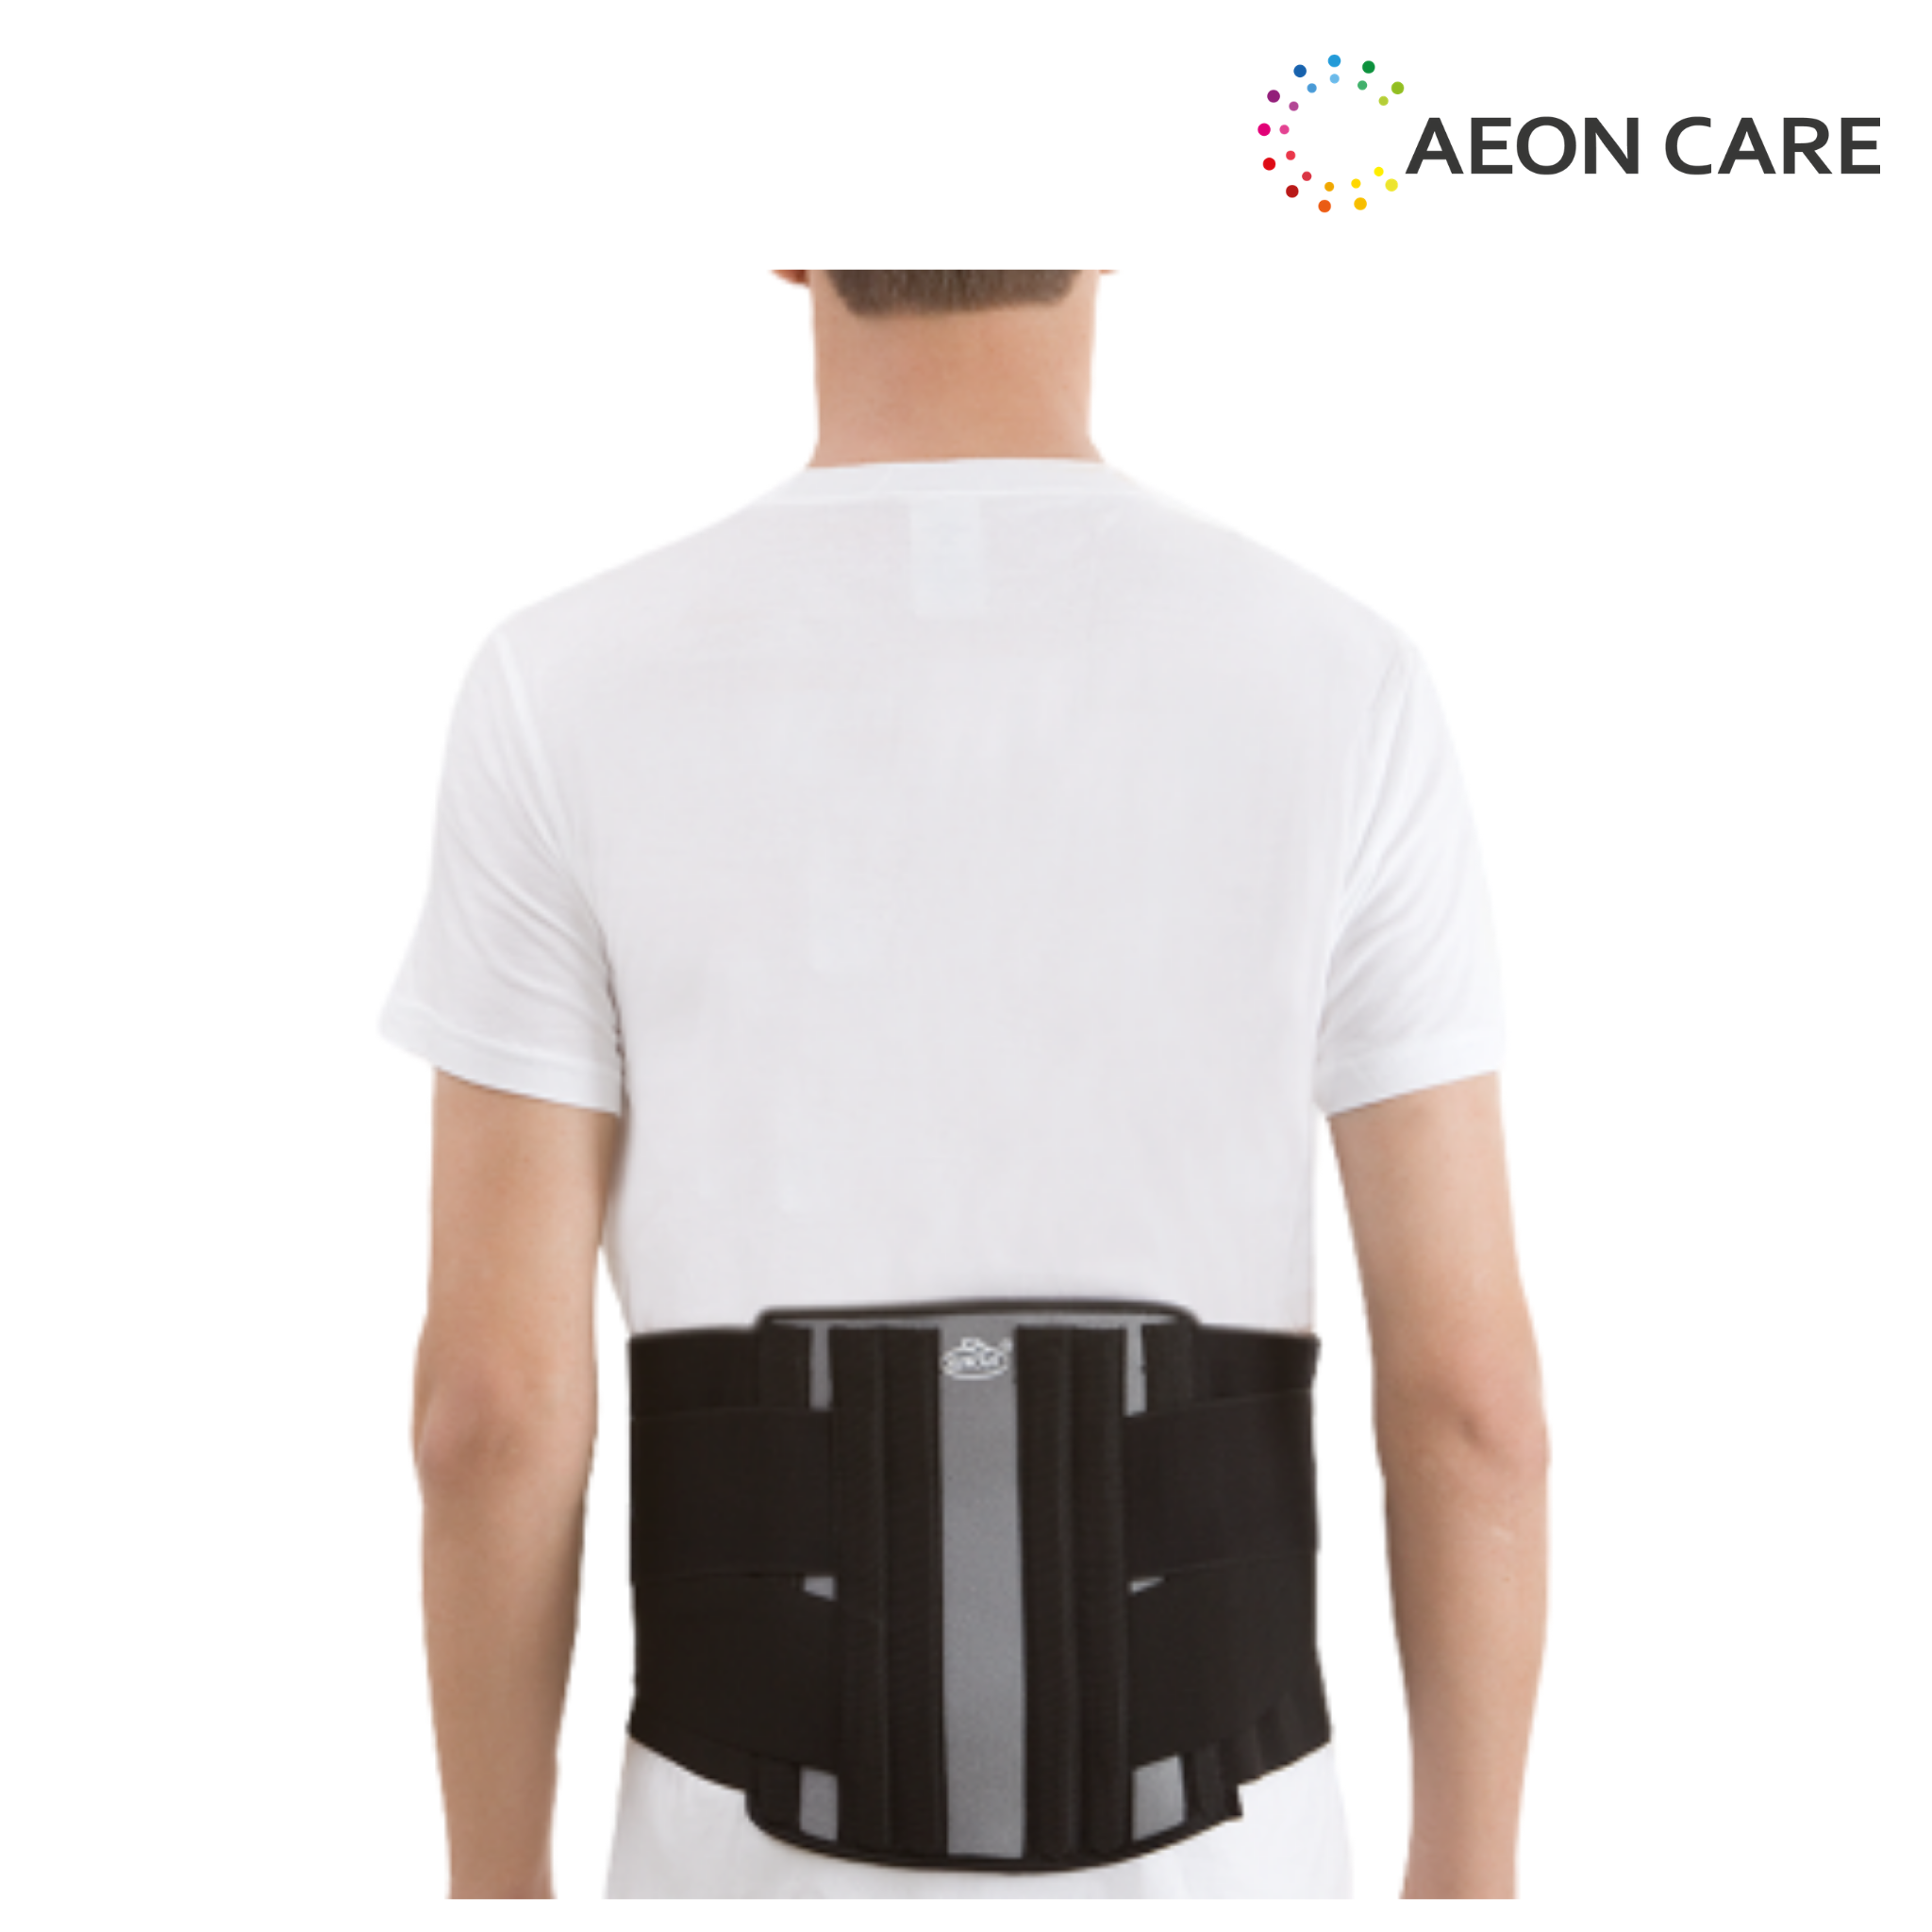 Elnova Lumbo Sacral Corset is used as back pain belt. The price of the Dyna's Elnova Lumbosacral Corset back pain belt is very effective effective comparing to the tynor back pain belt.